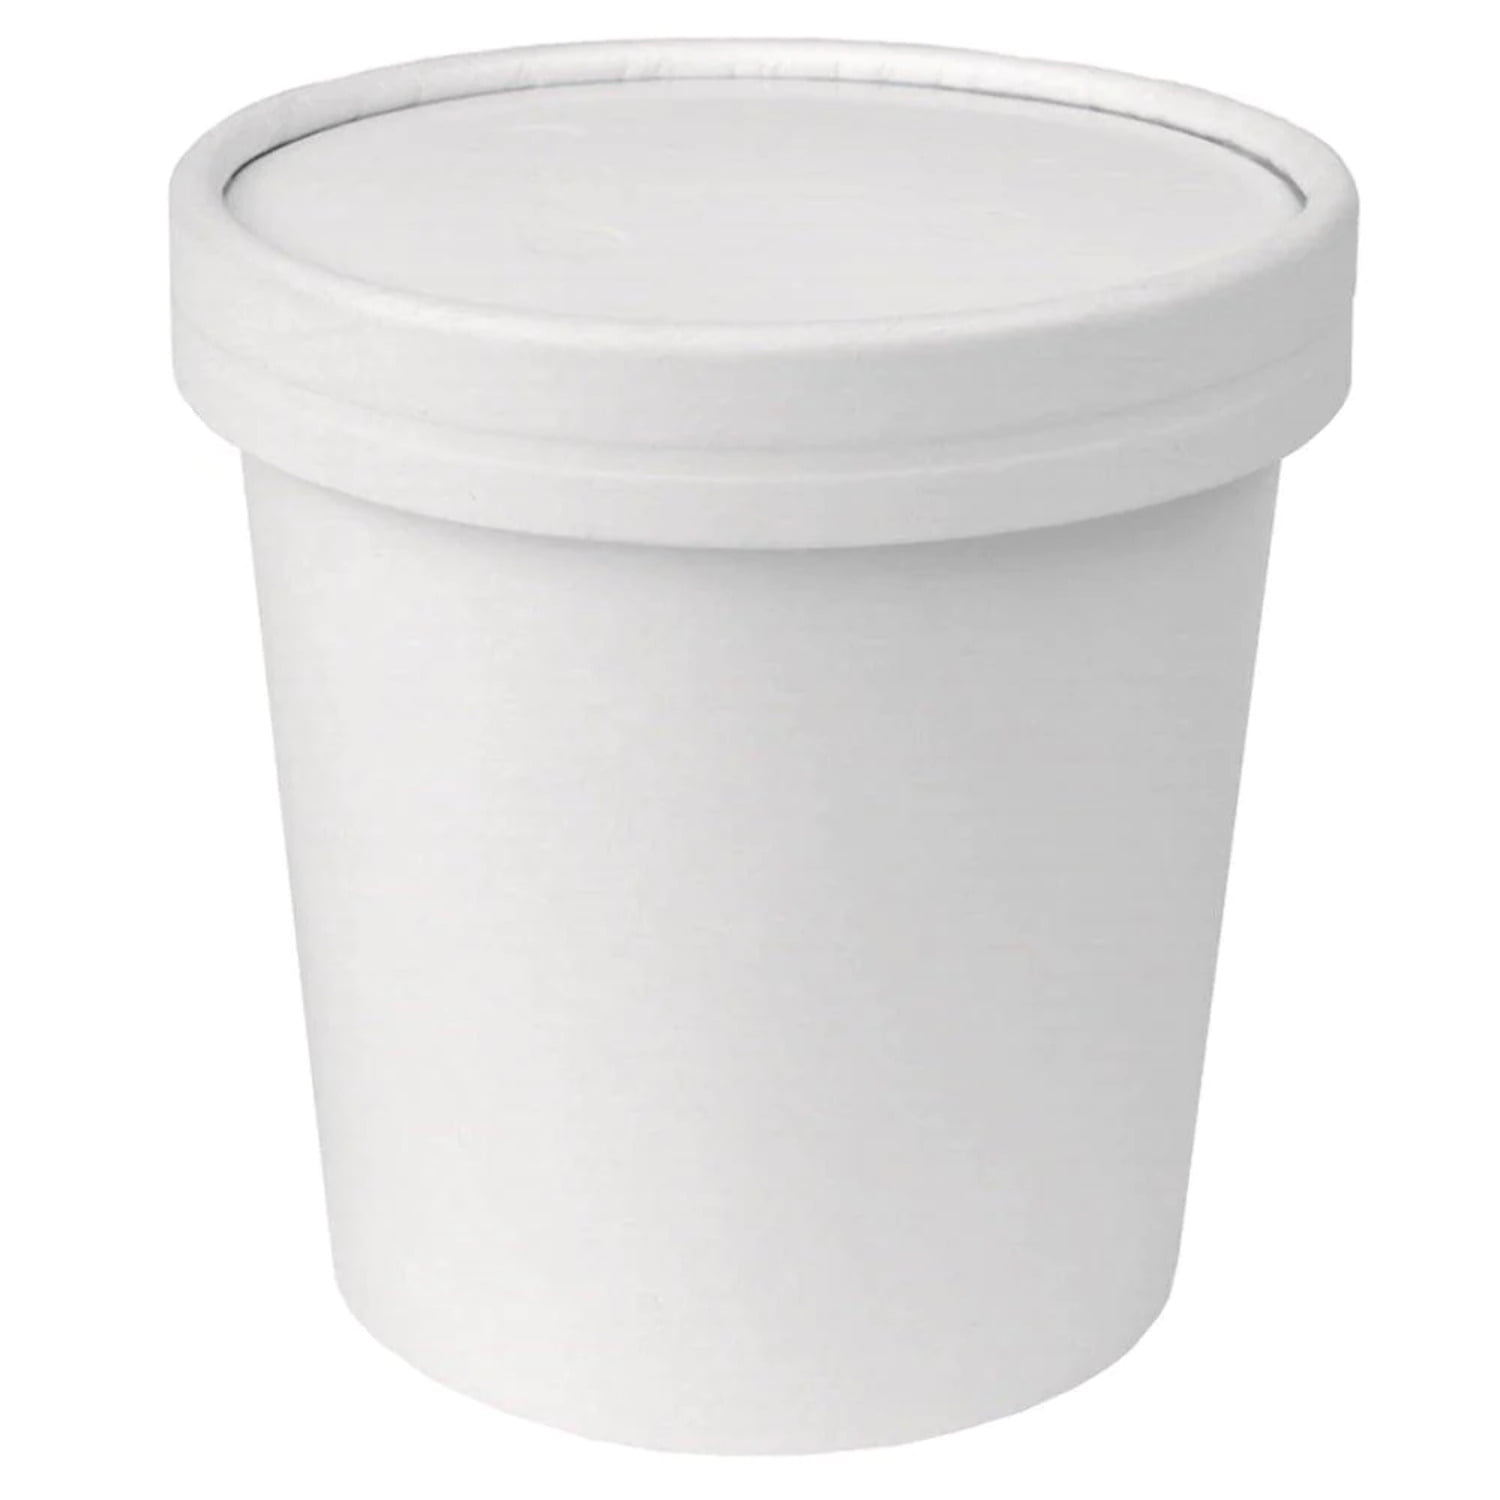 Glowcoast Ice Cream Containers With Lids - 16 oz Pint Disposable Ice Cream  Storage Container for Homemade Icecream. Freezer-Safe Paper Tub with Lid